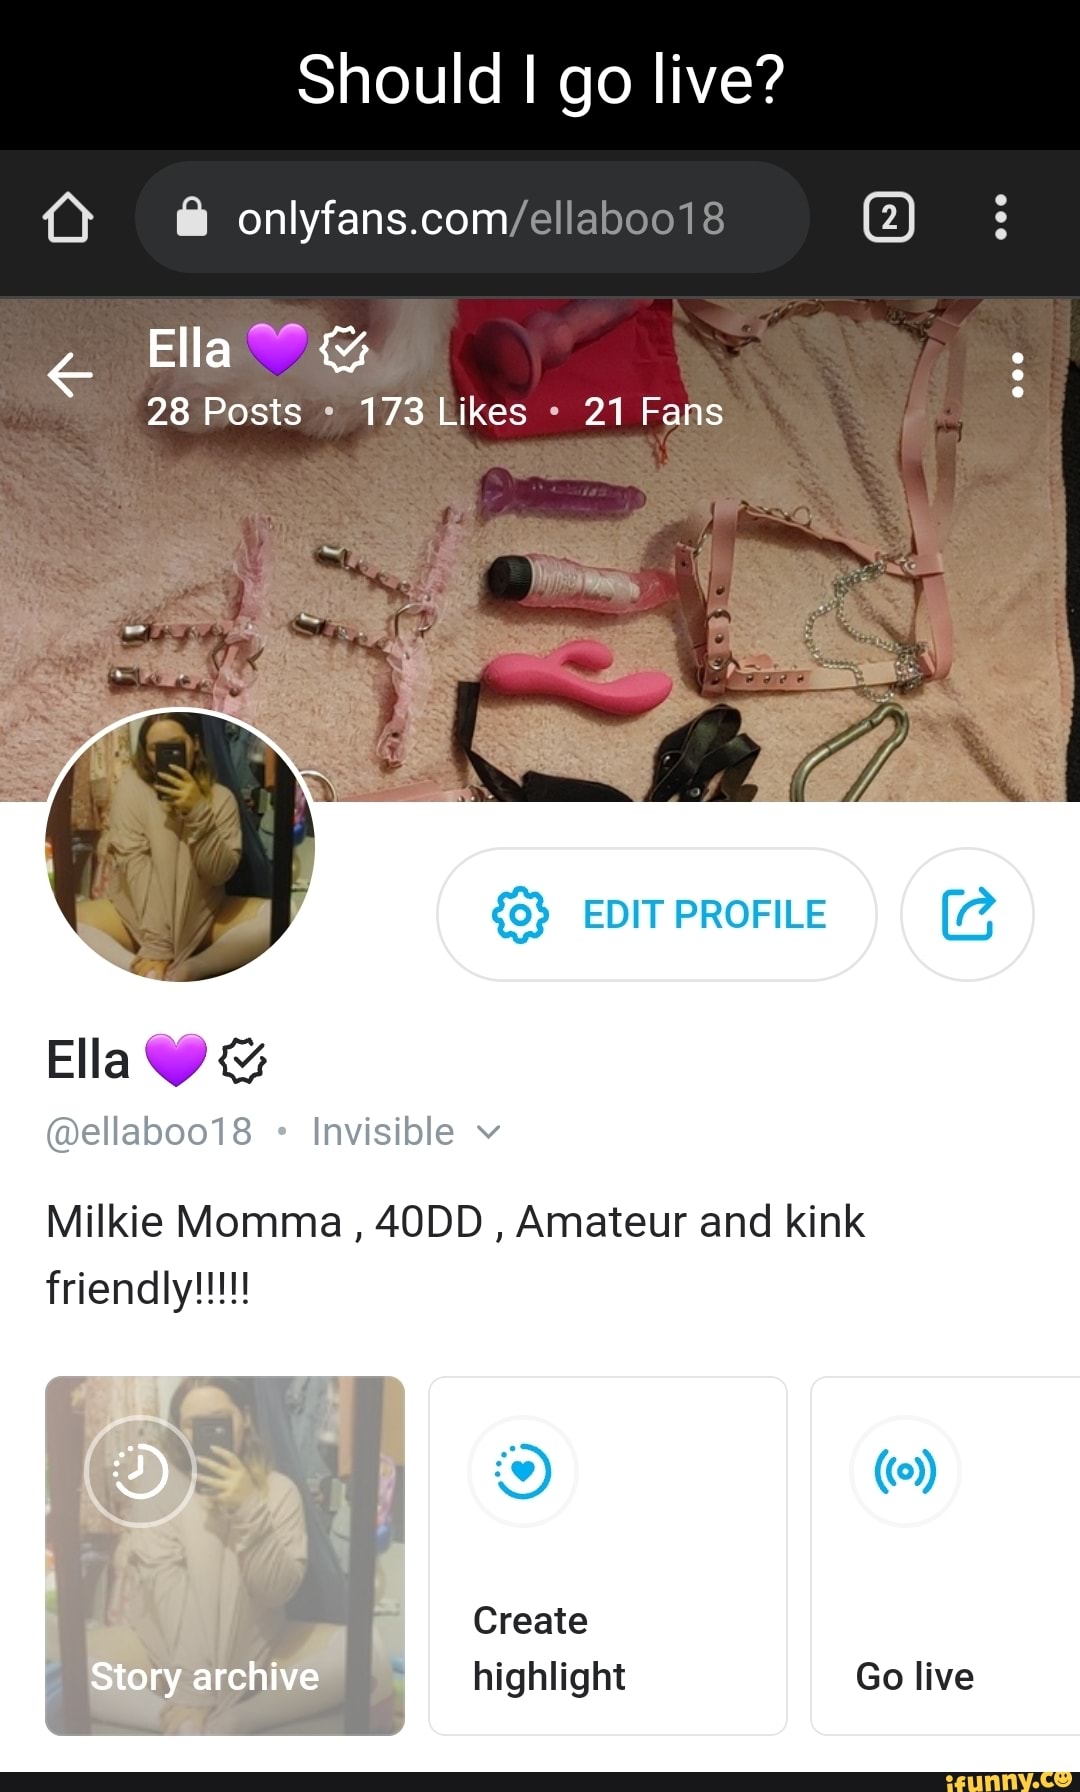 Can you go live on only fans